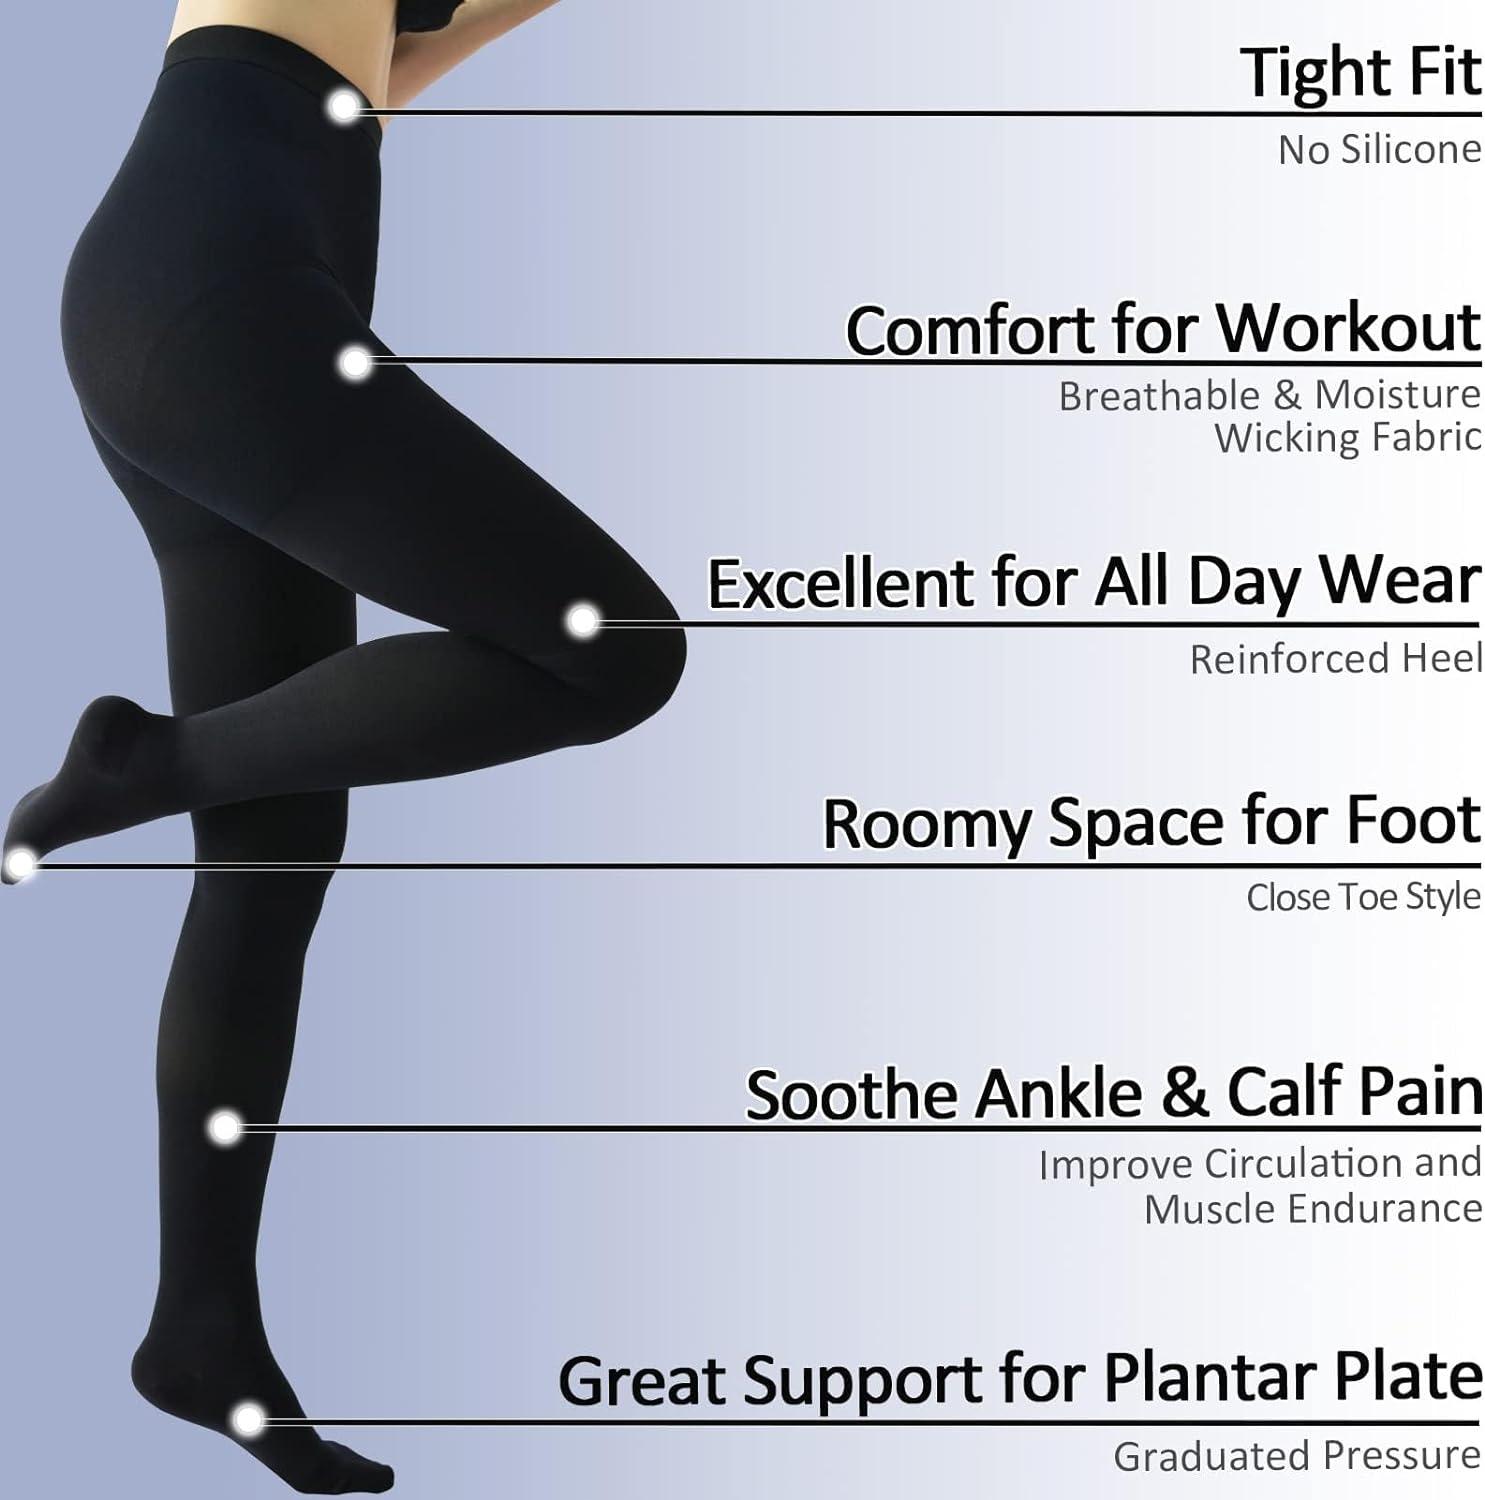  Medical Compression Tights by Beister, 20-30 mmHg Thin Footless  Graduated Support Pantyhose for Women & Men, High Waist Circulation Compression  Leggings for Varicose Veins, Edema, DVT, Leg Pain : Health 